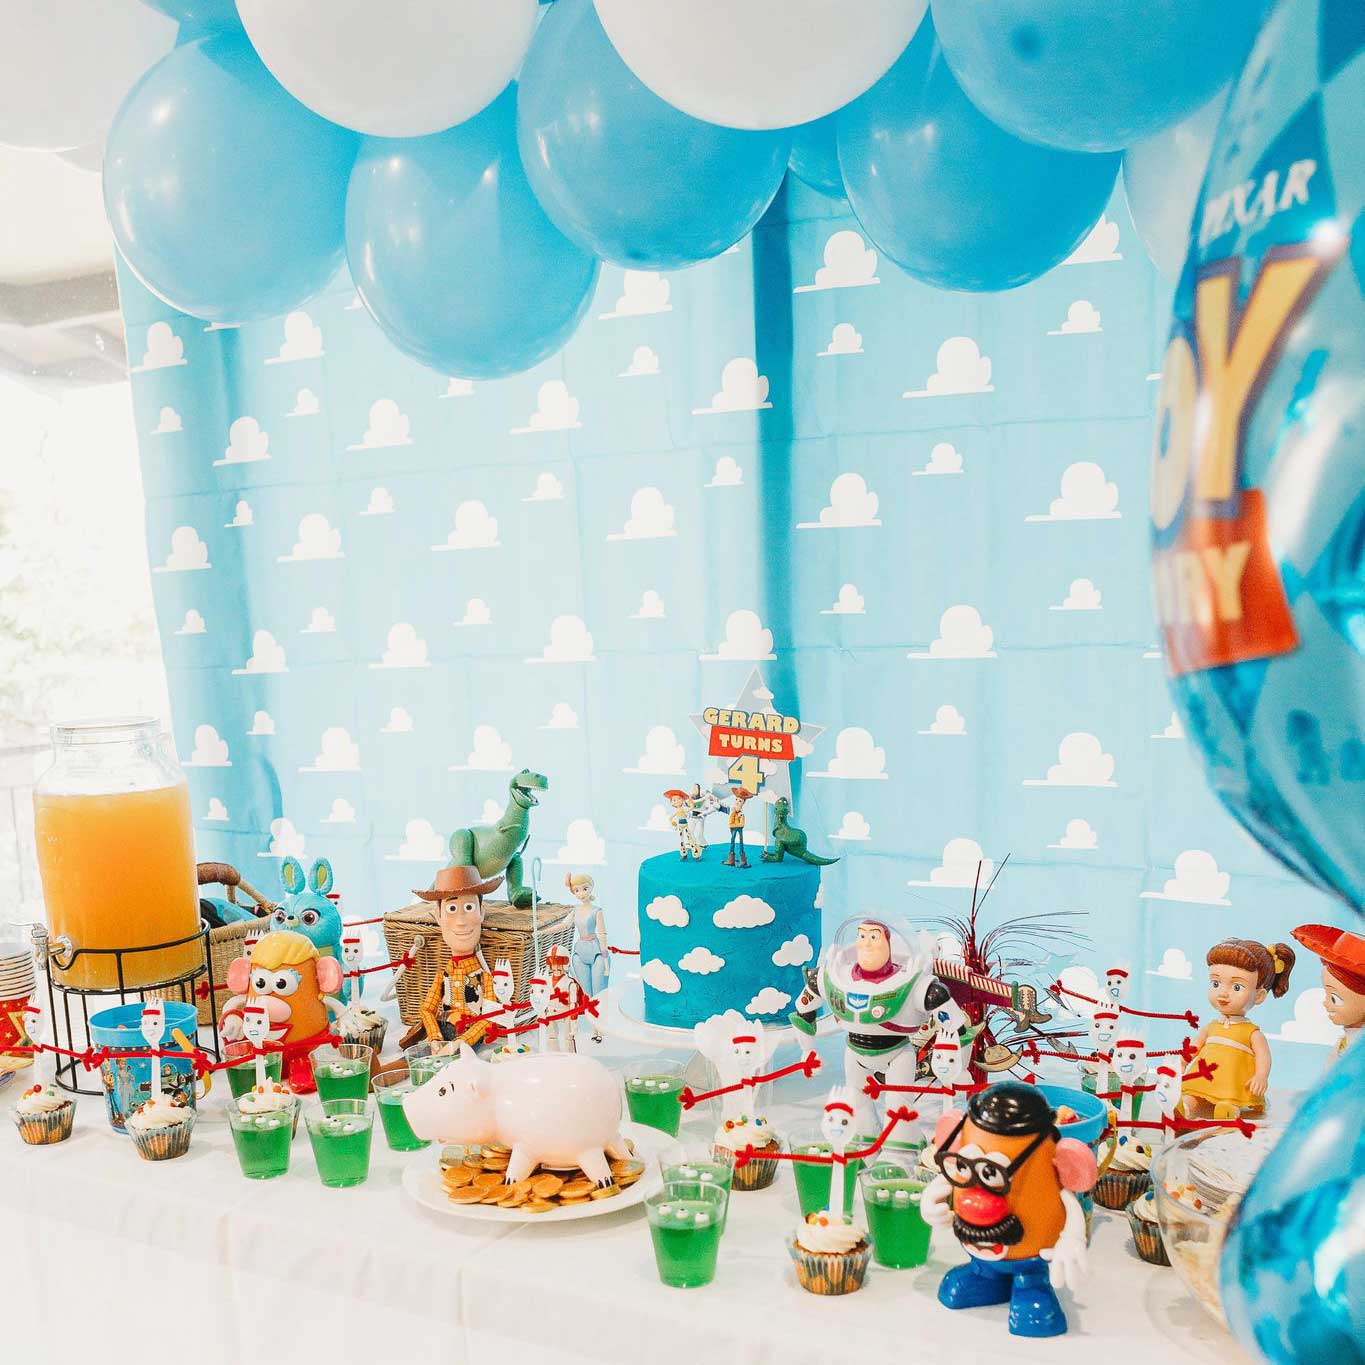 Toy Story party table set up